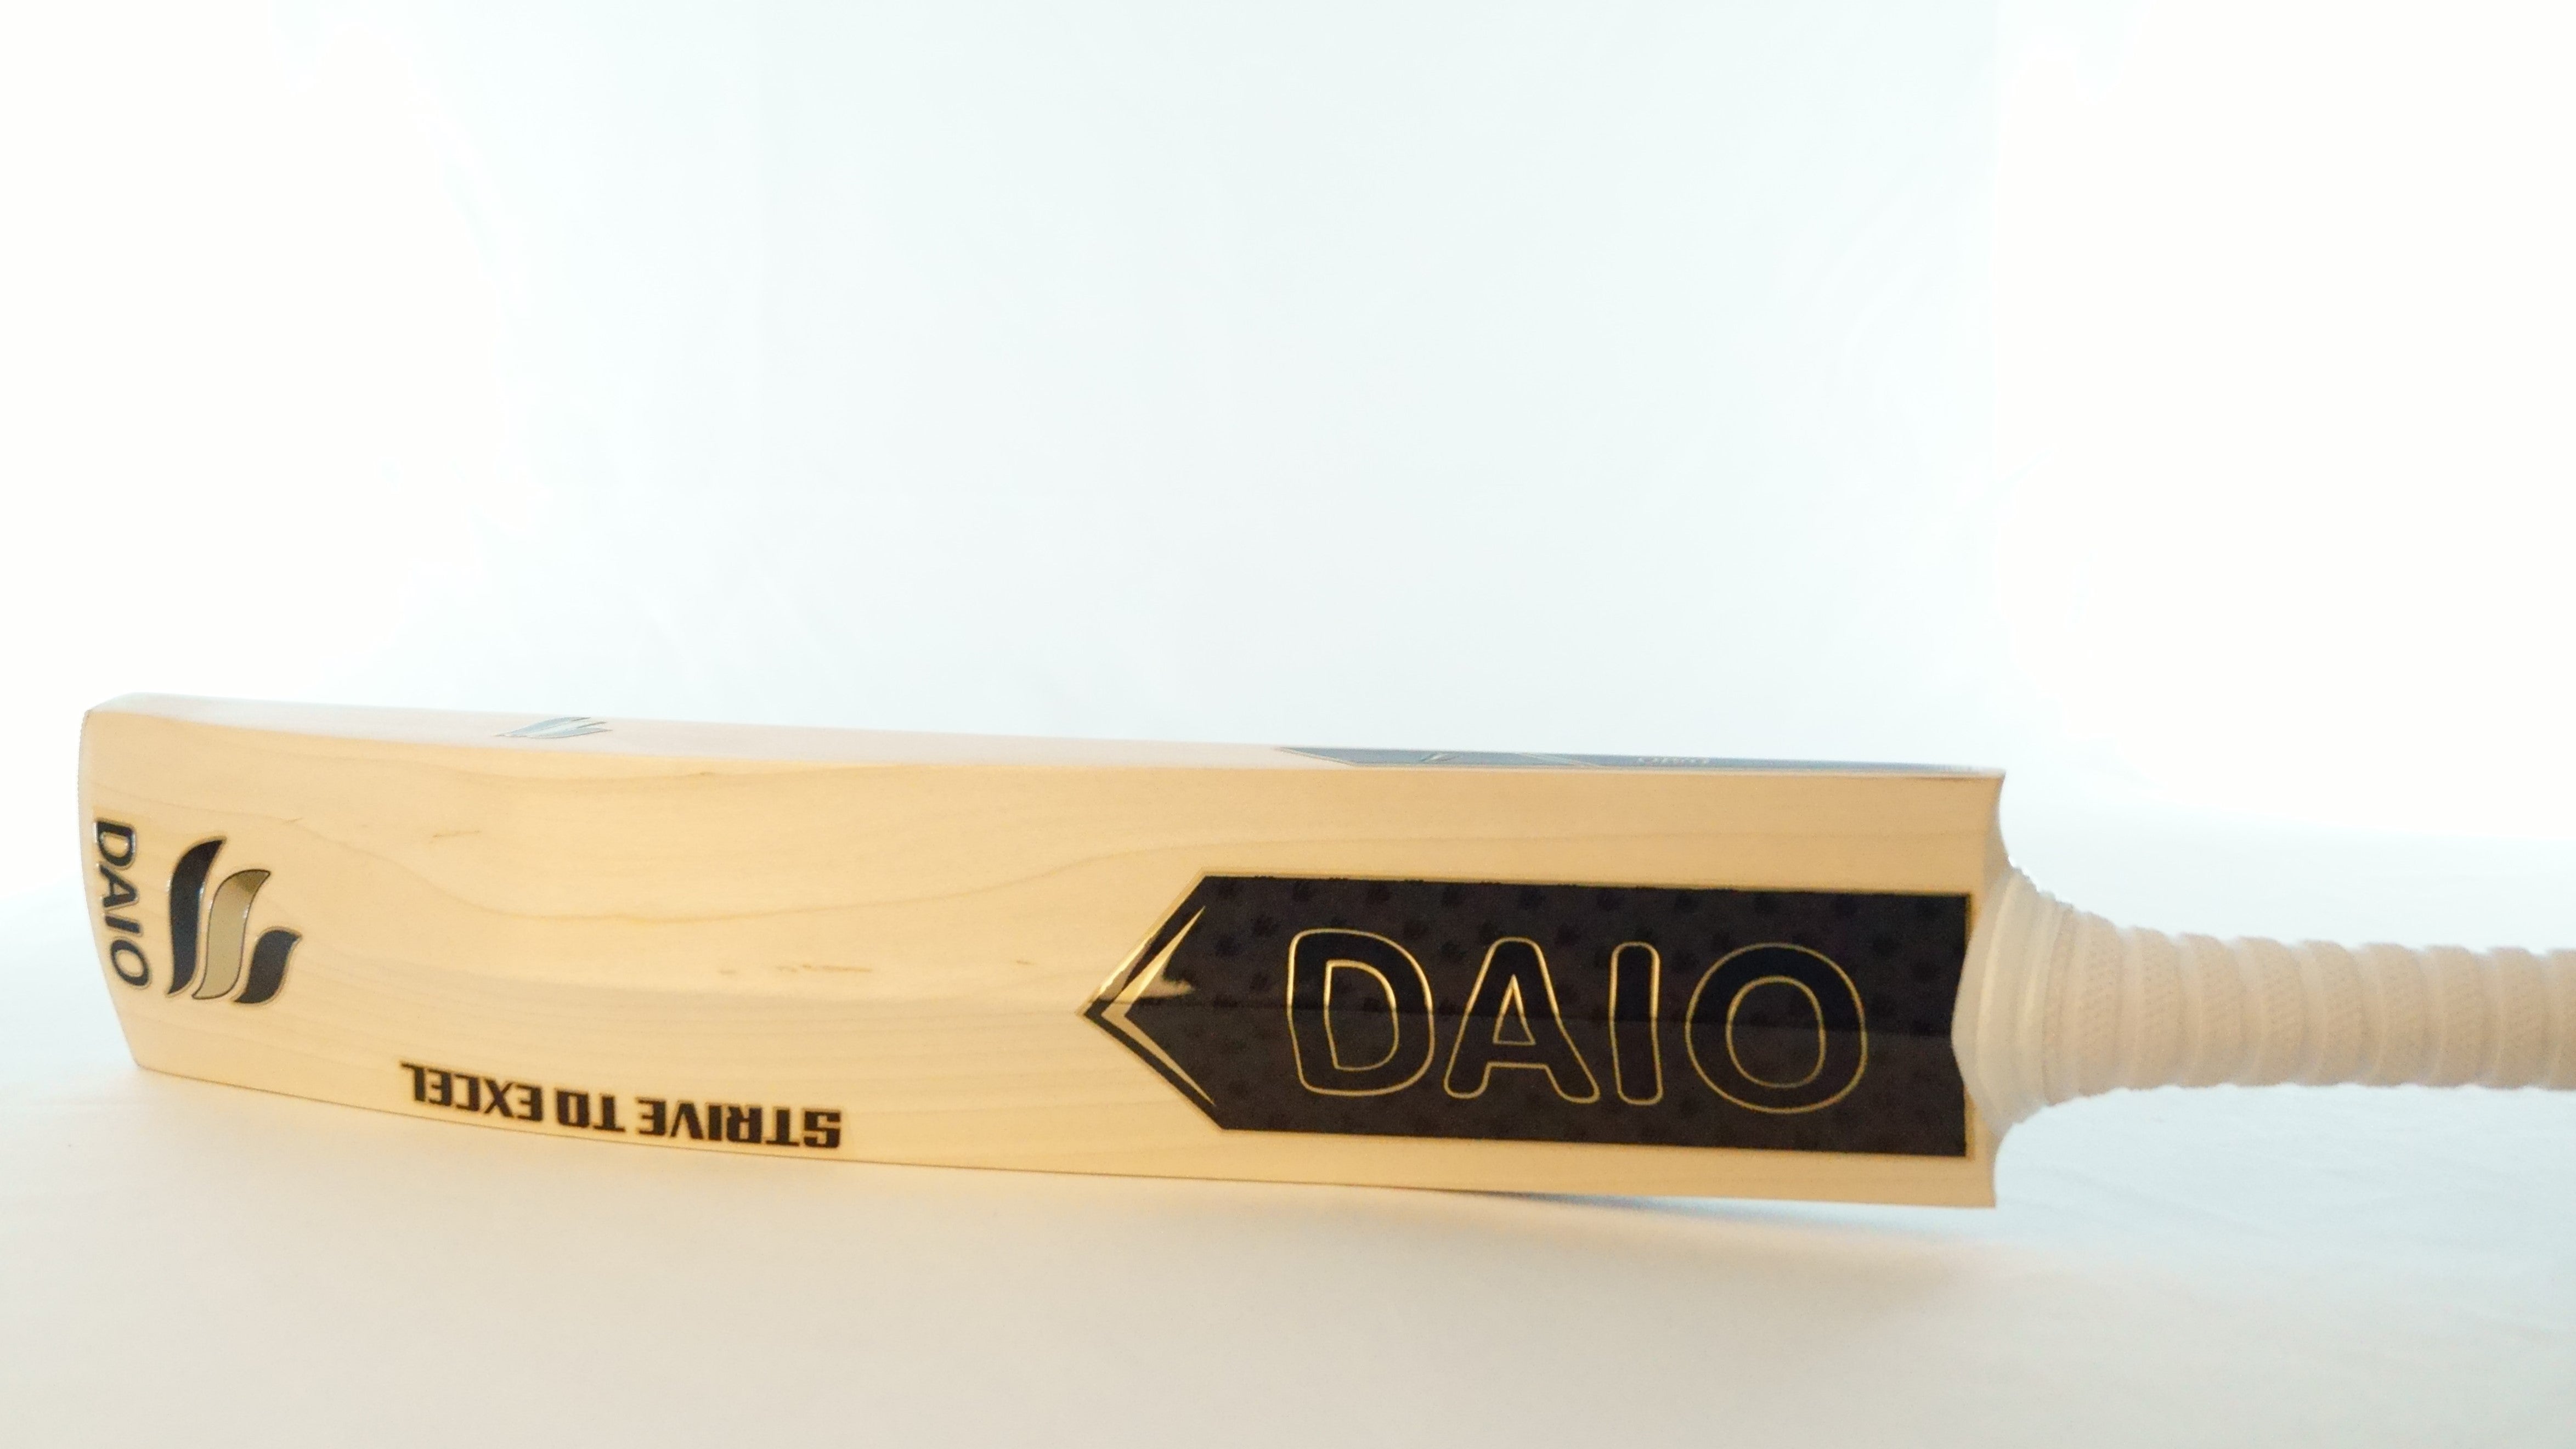 Daio Signature-X English willow cricket bat size 5 & 6 only